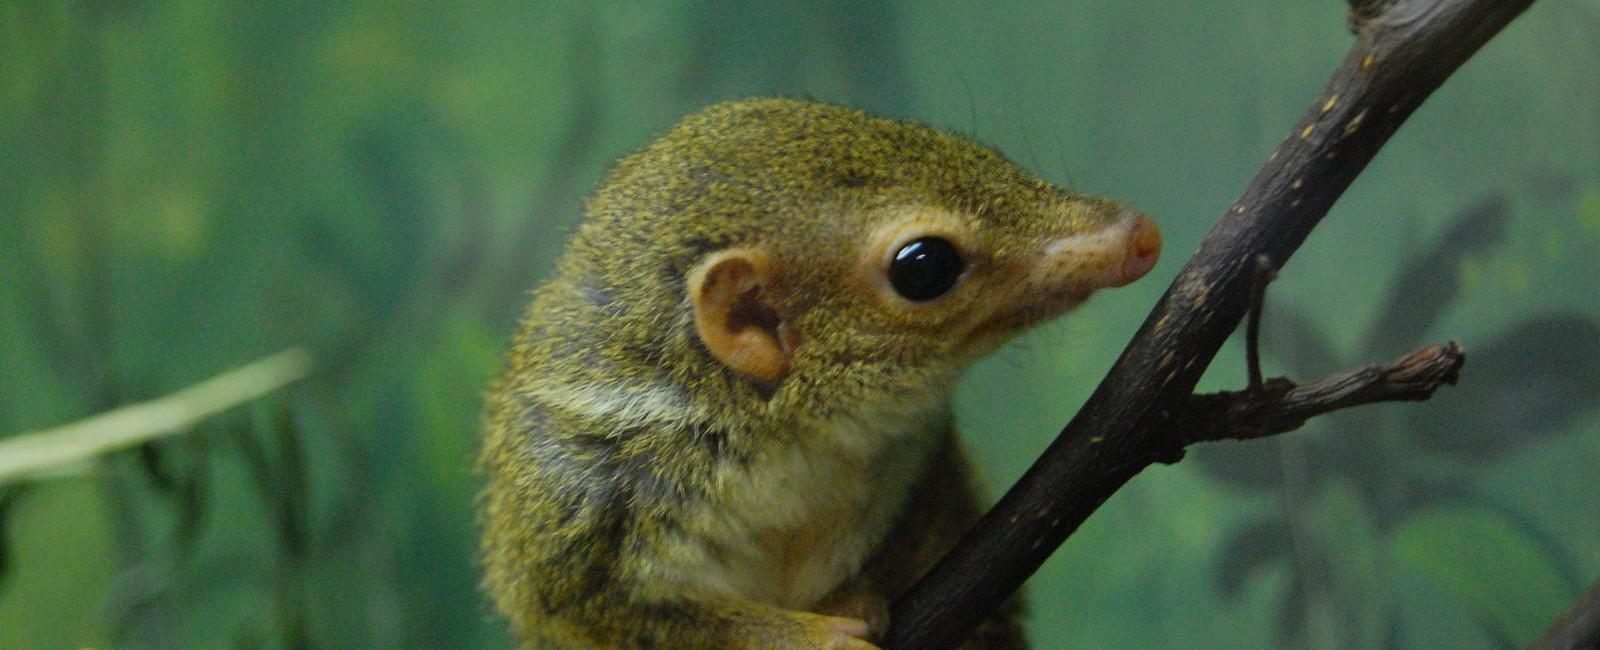 Apart from humans tree shrews are the only other animals who seek spicy food humans enjoy the thrill factor of eating chili peppers while the shrews are less sensitive to it